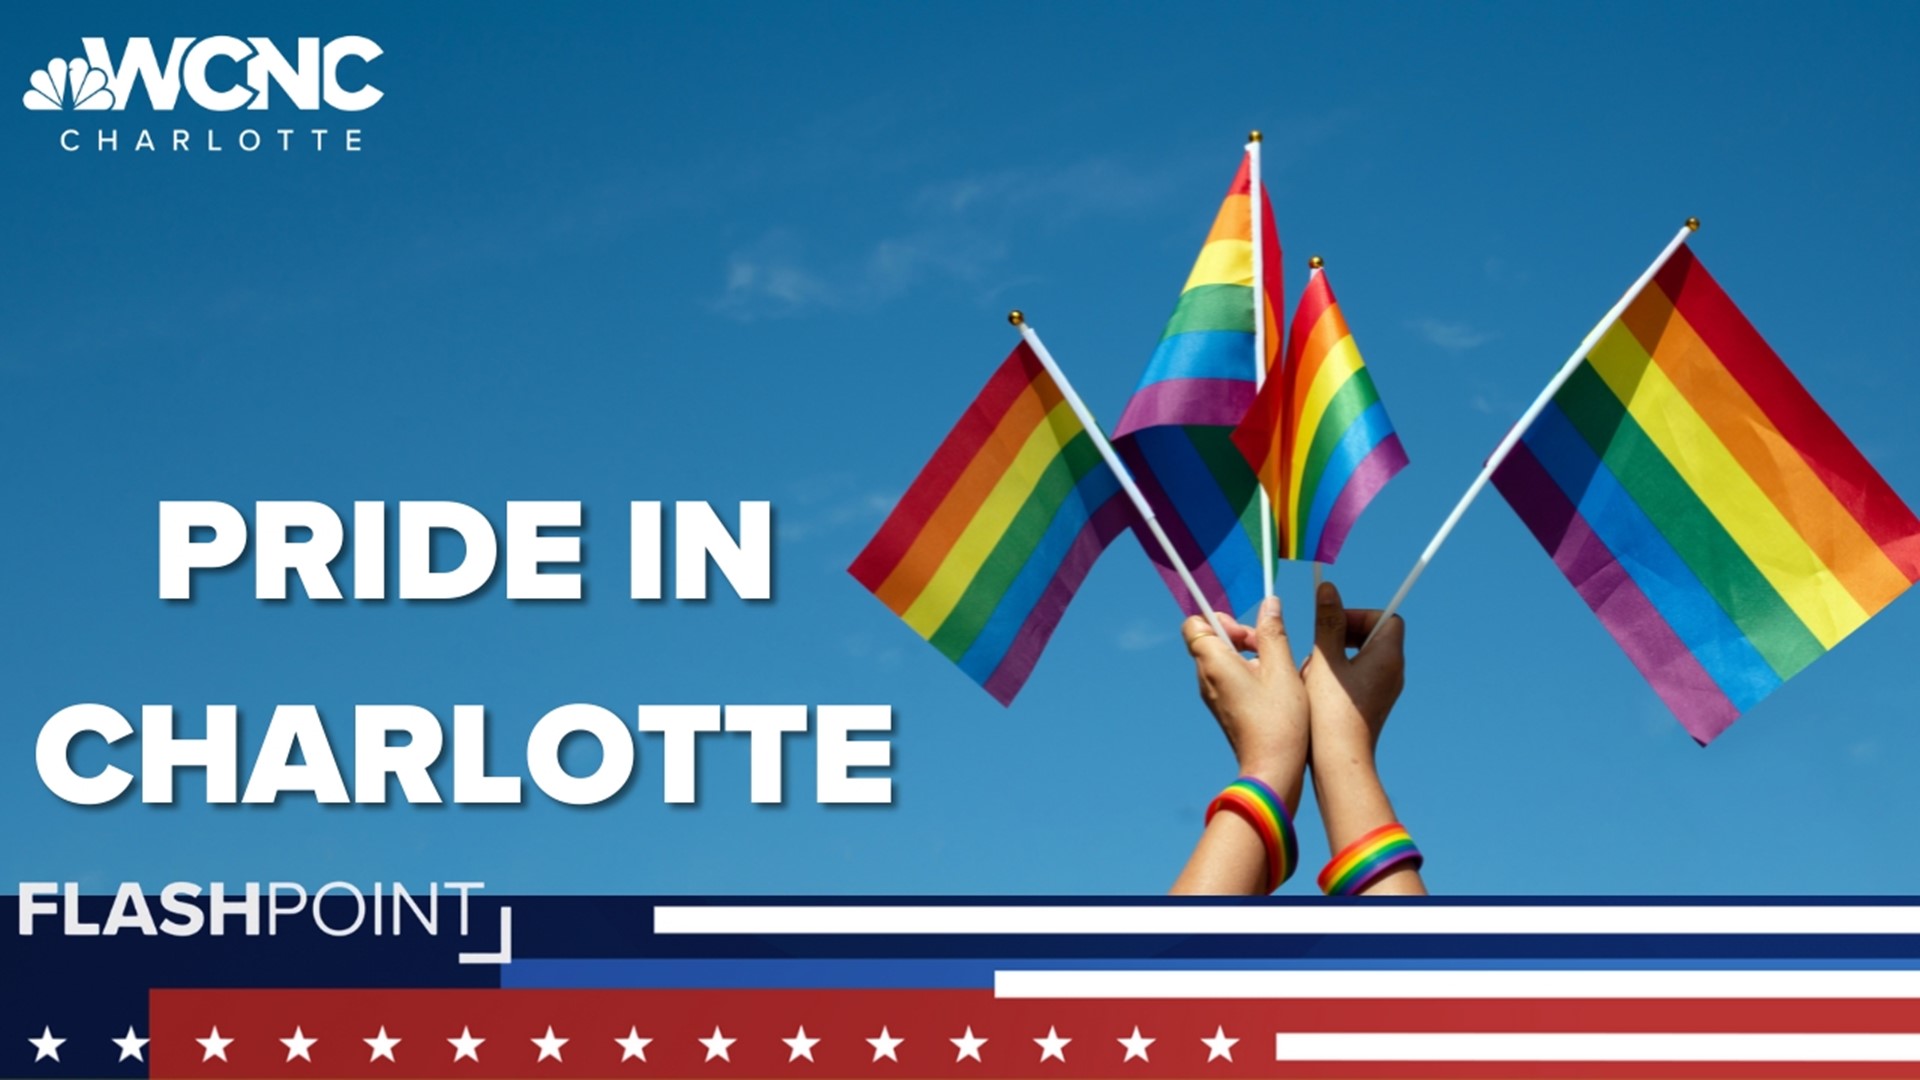 On Flashpoint, Communications Director Matt Comer discusses the importance of commemorating Pride Month in Charlotte.